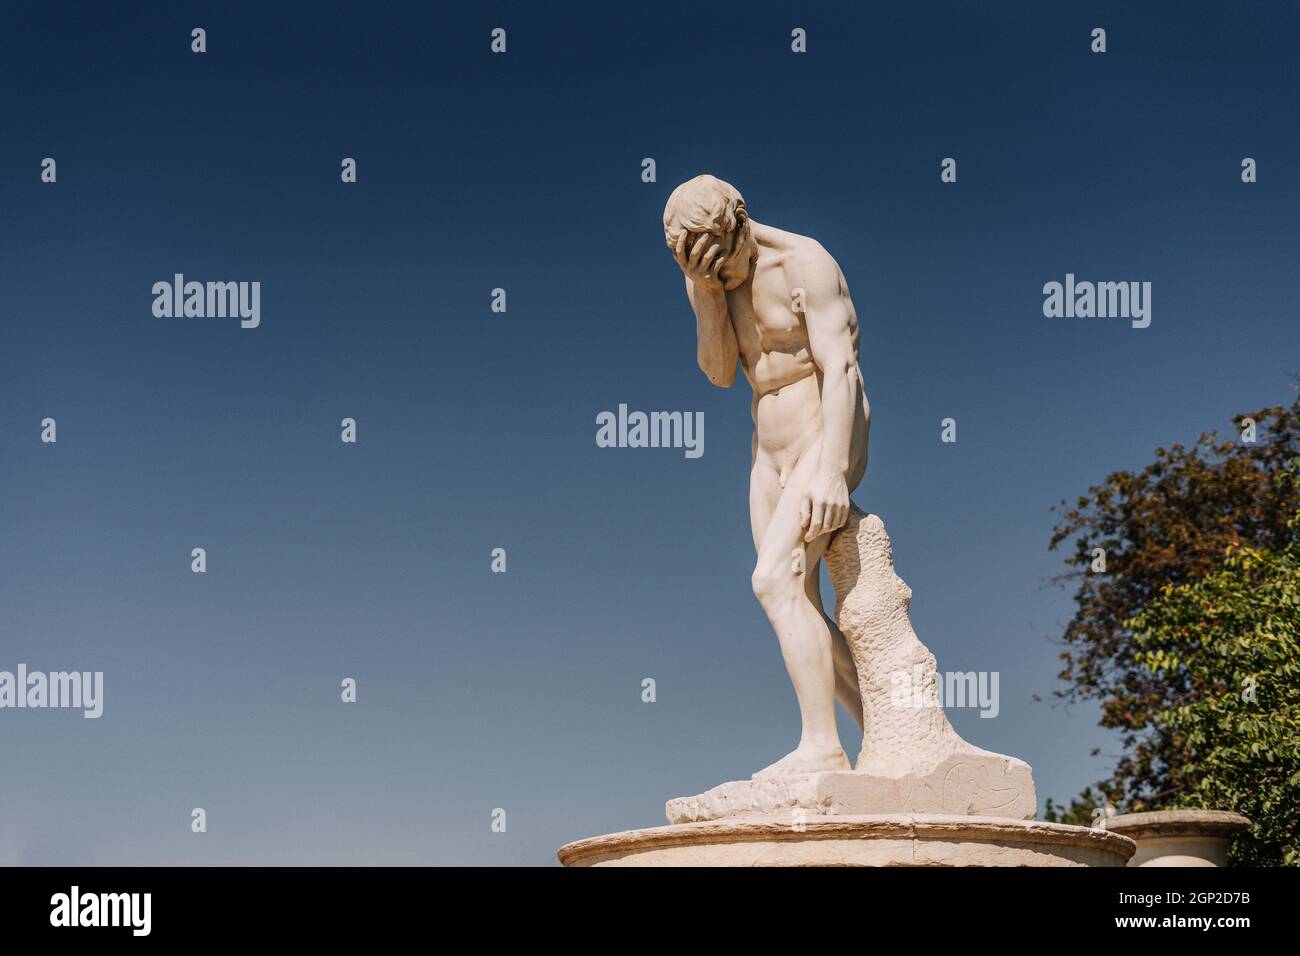 Marble statue making a facepalm gesture against sky Stock Photo